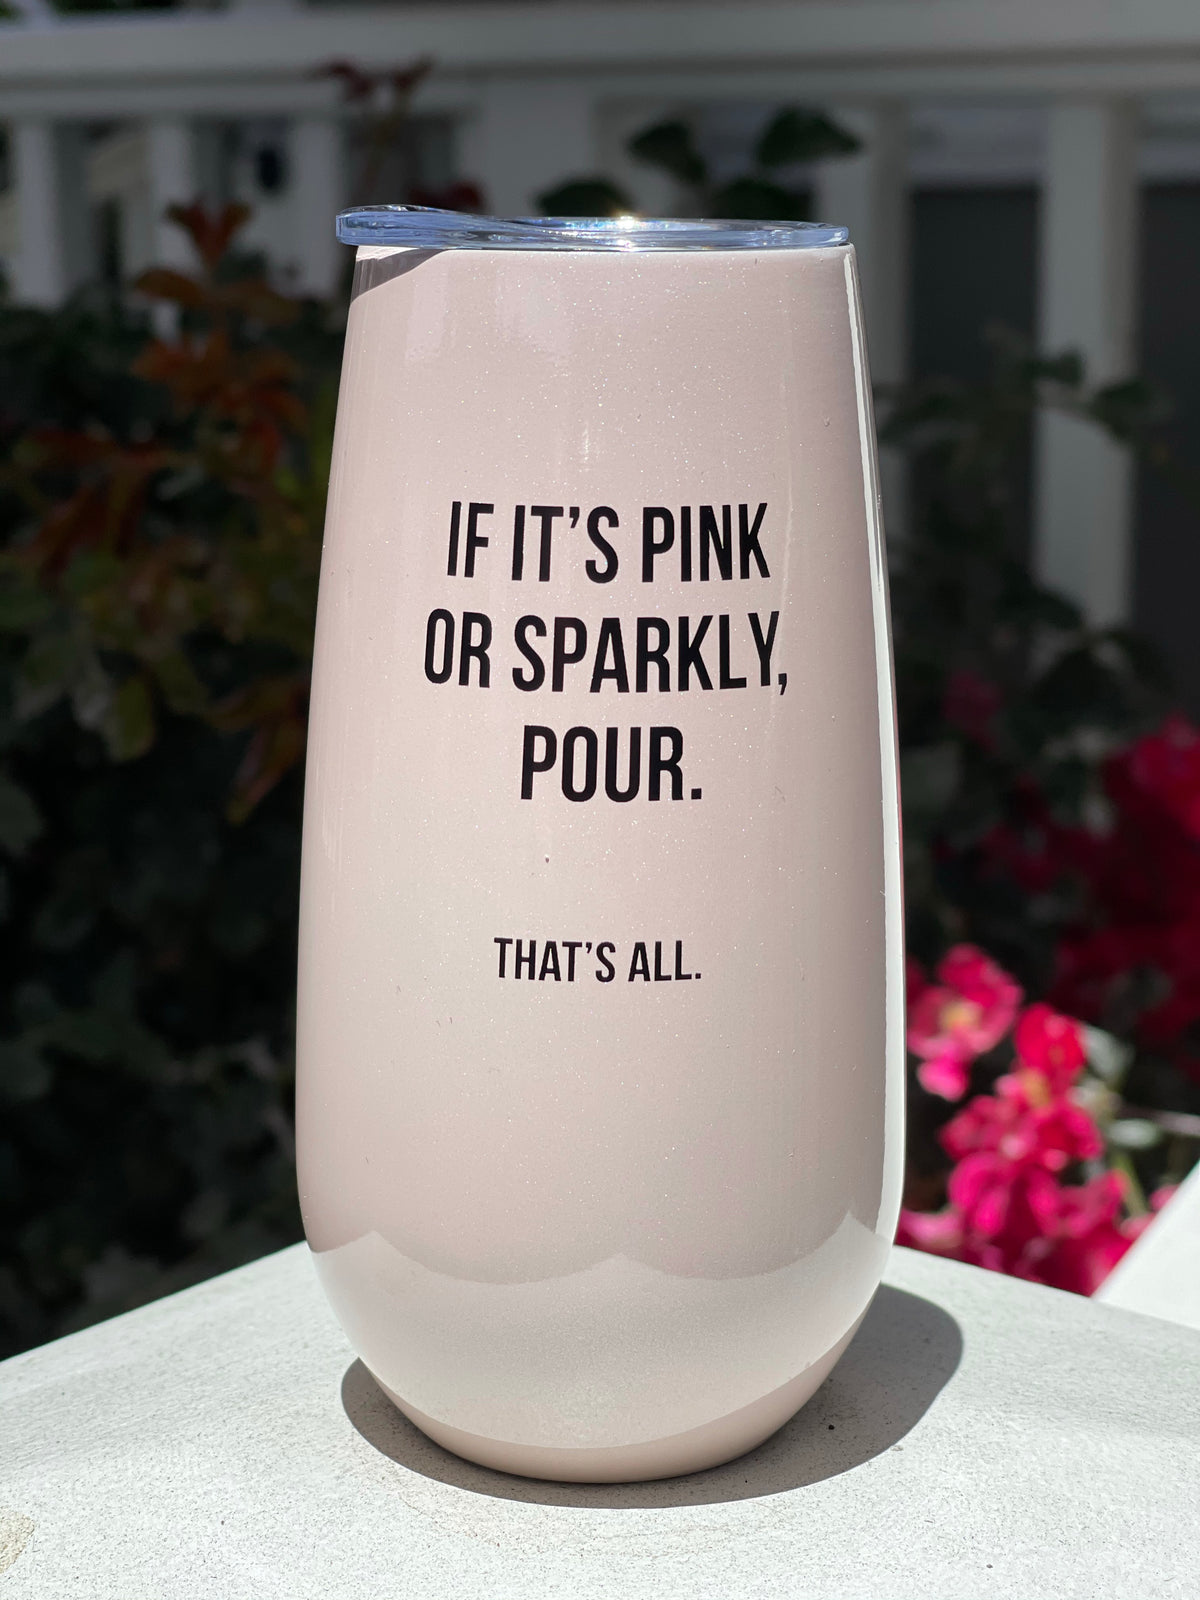 That's All ®Champagne Tumbler- It it's pink or sparkly, pour